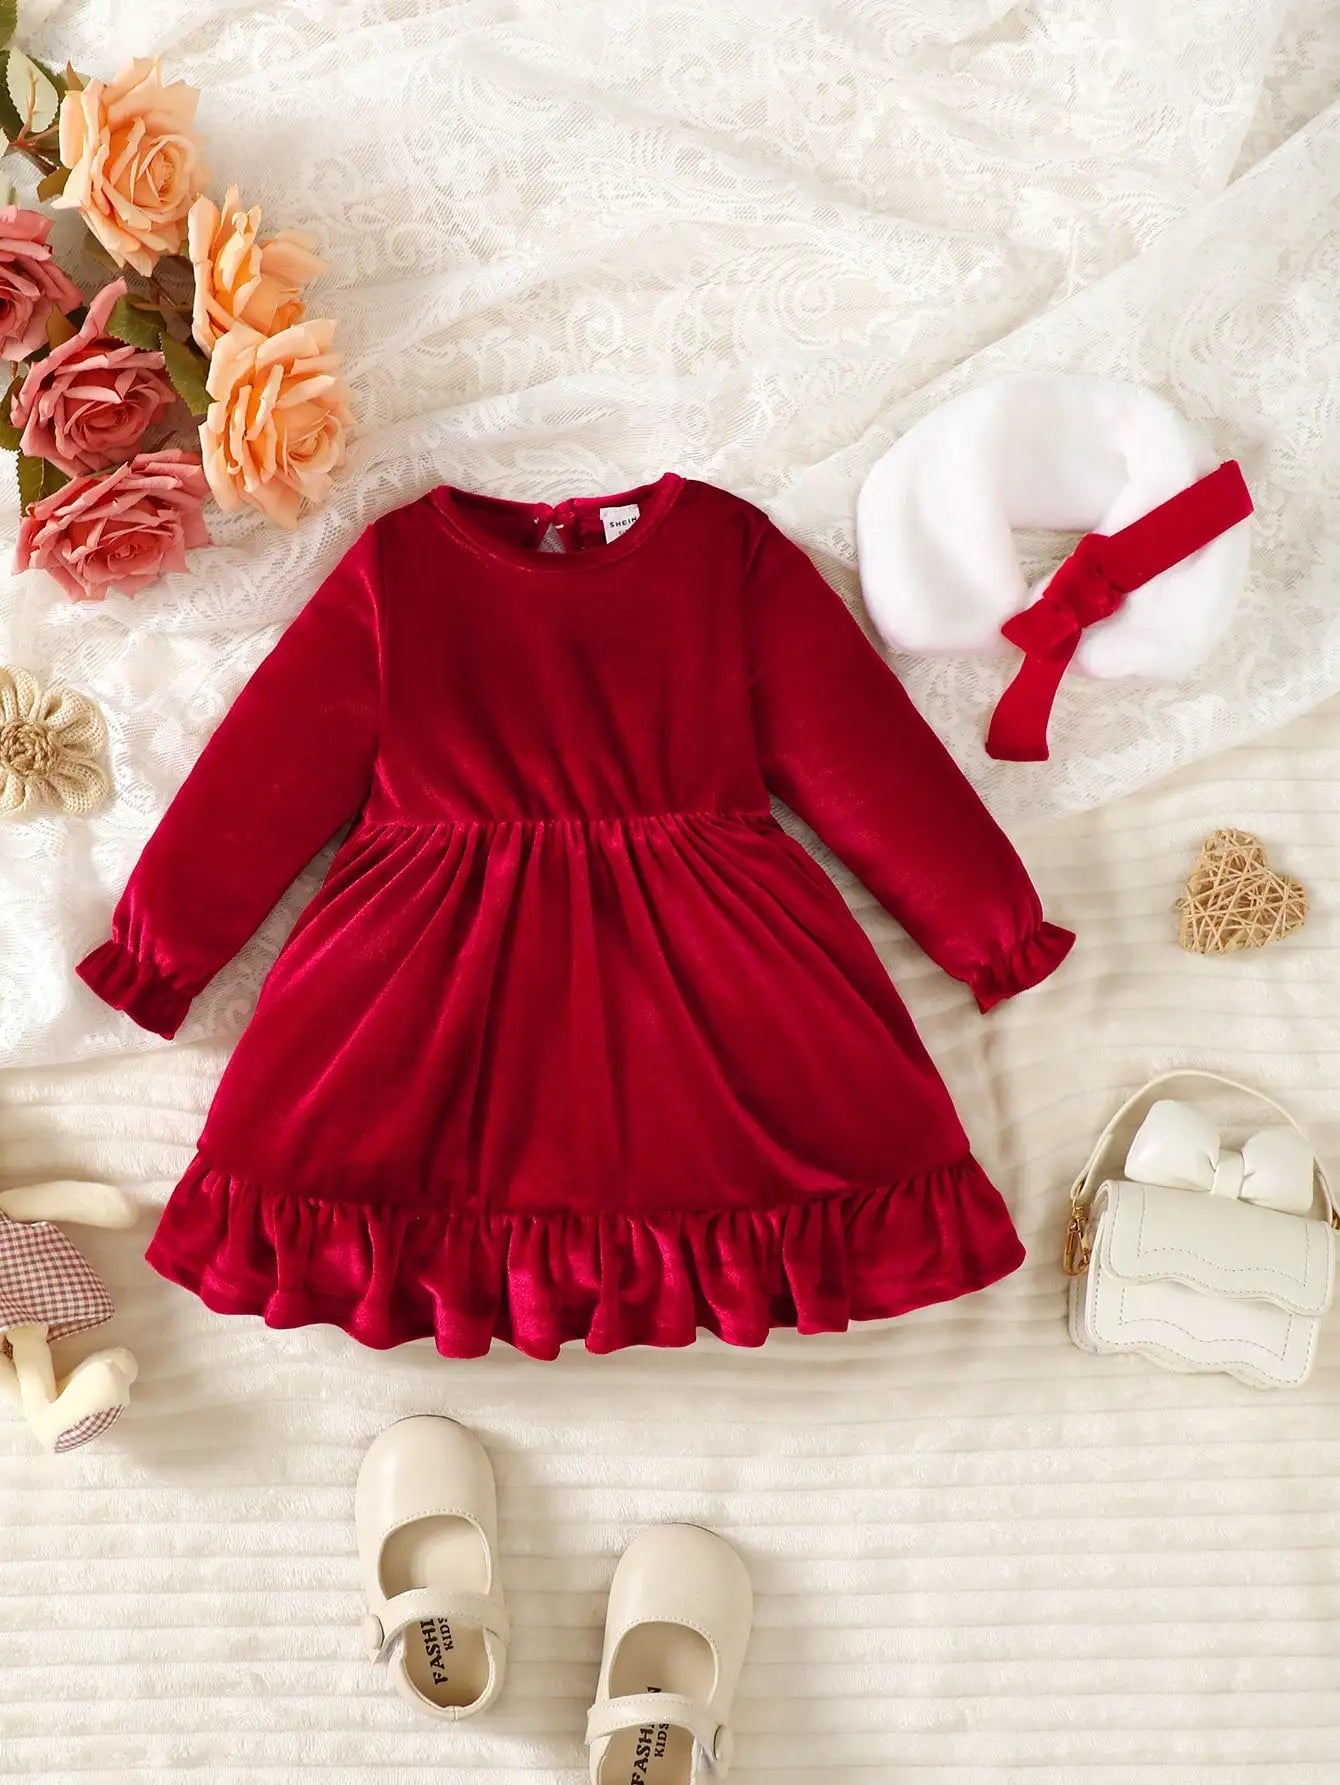 Baby Winter Casual Fashion Warm Red Velvet Soft and Comfortable Long Sleeve Dress with Detachable Fur Collar Two Piece Set